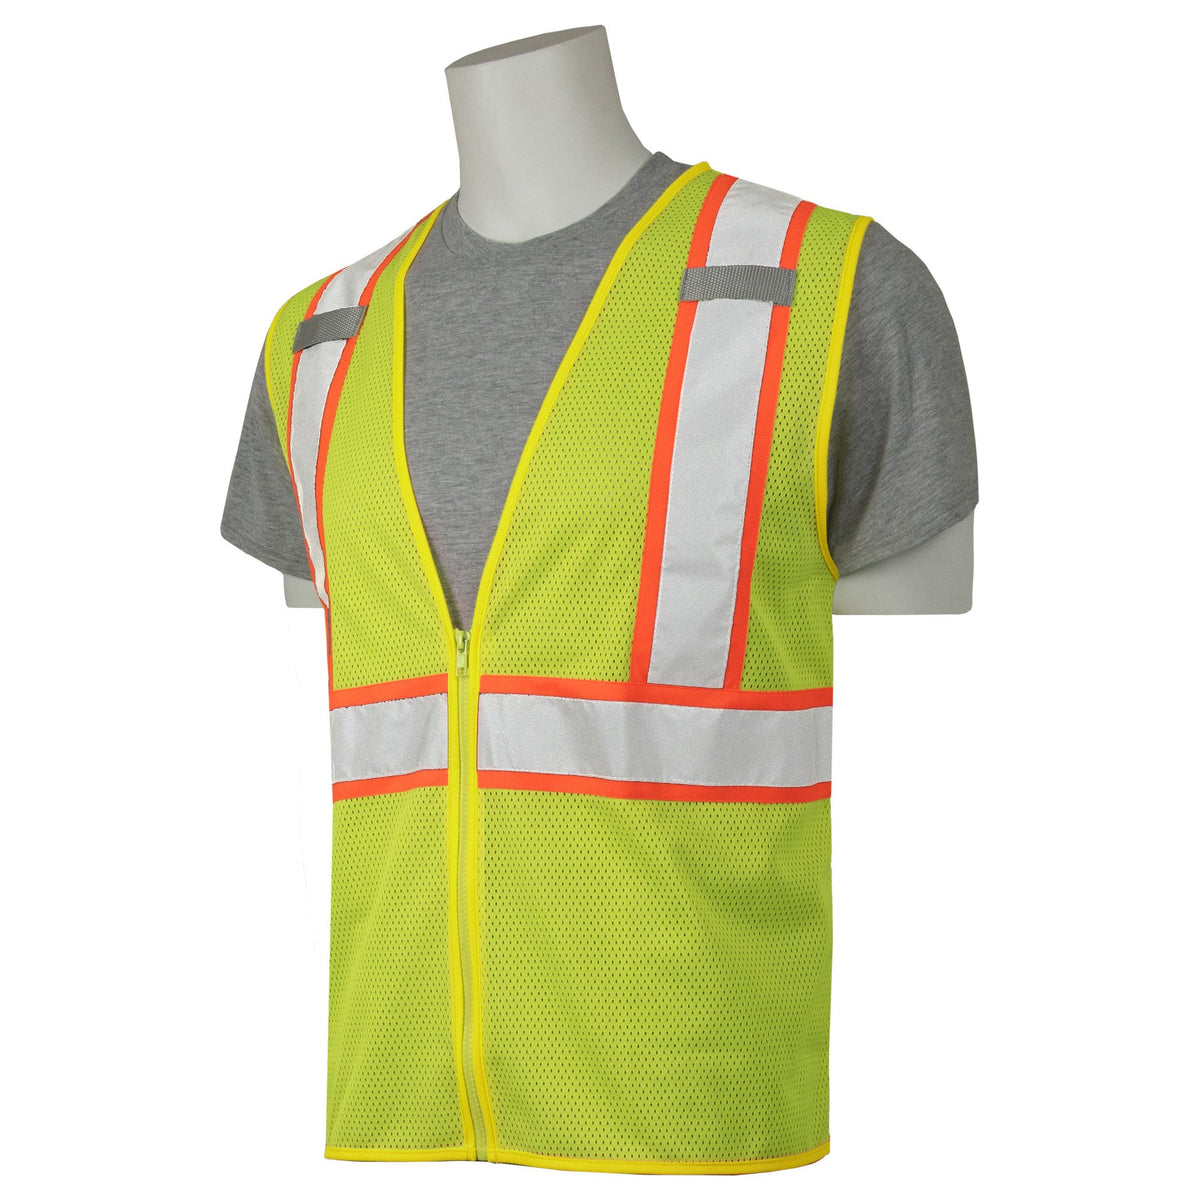 S384 CL2 Mesh Safety Vest with Contrasting Trim 1PC